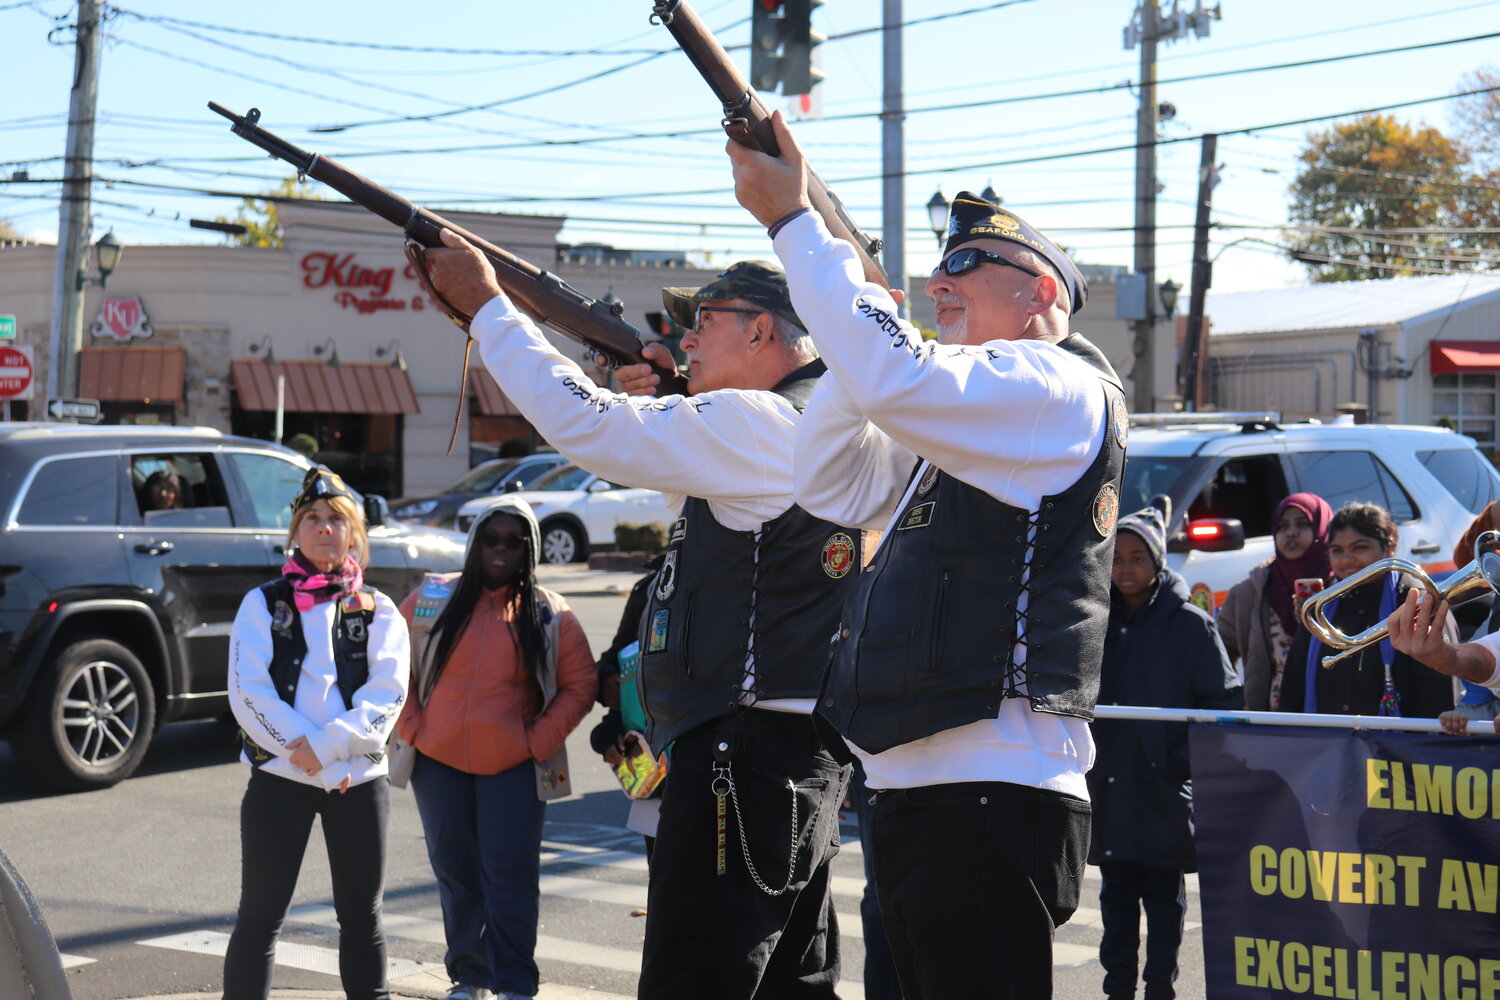 Pete Busch and Kevin Tirman fired the honorary rifle volley at the end of the ceremony hosted on Veterans Day last weekend in Elmont.